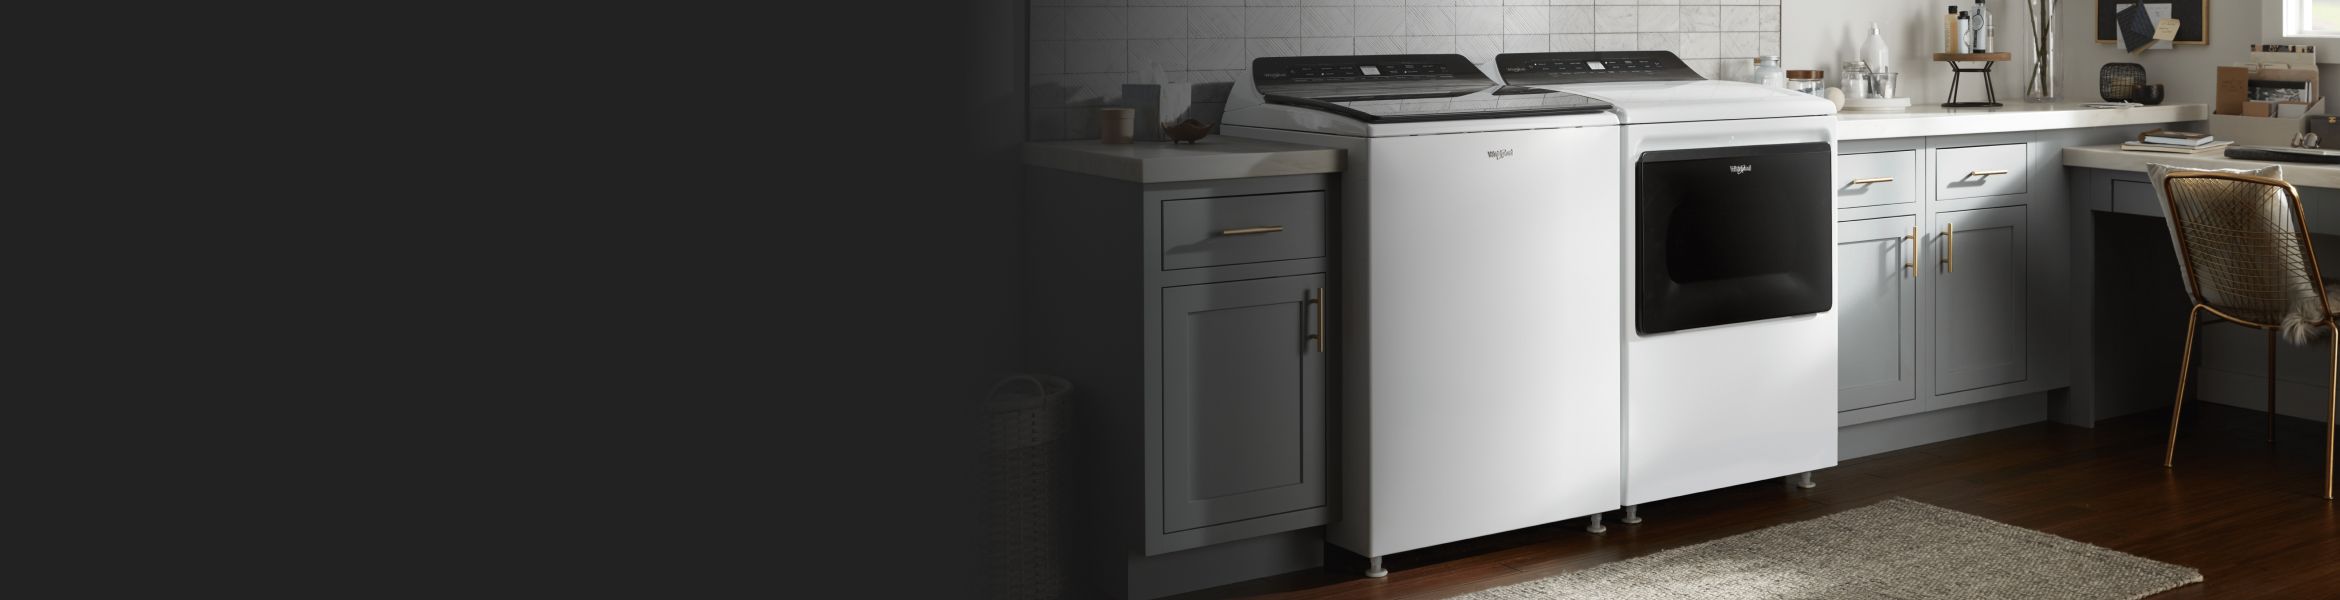 Whirlpool® top-loading washer and dryer in white